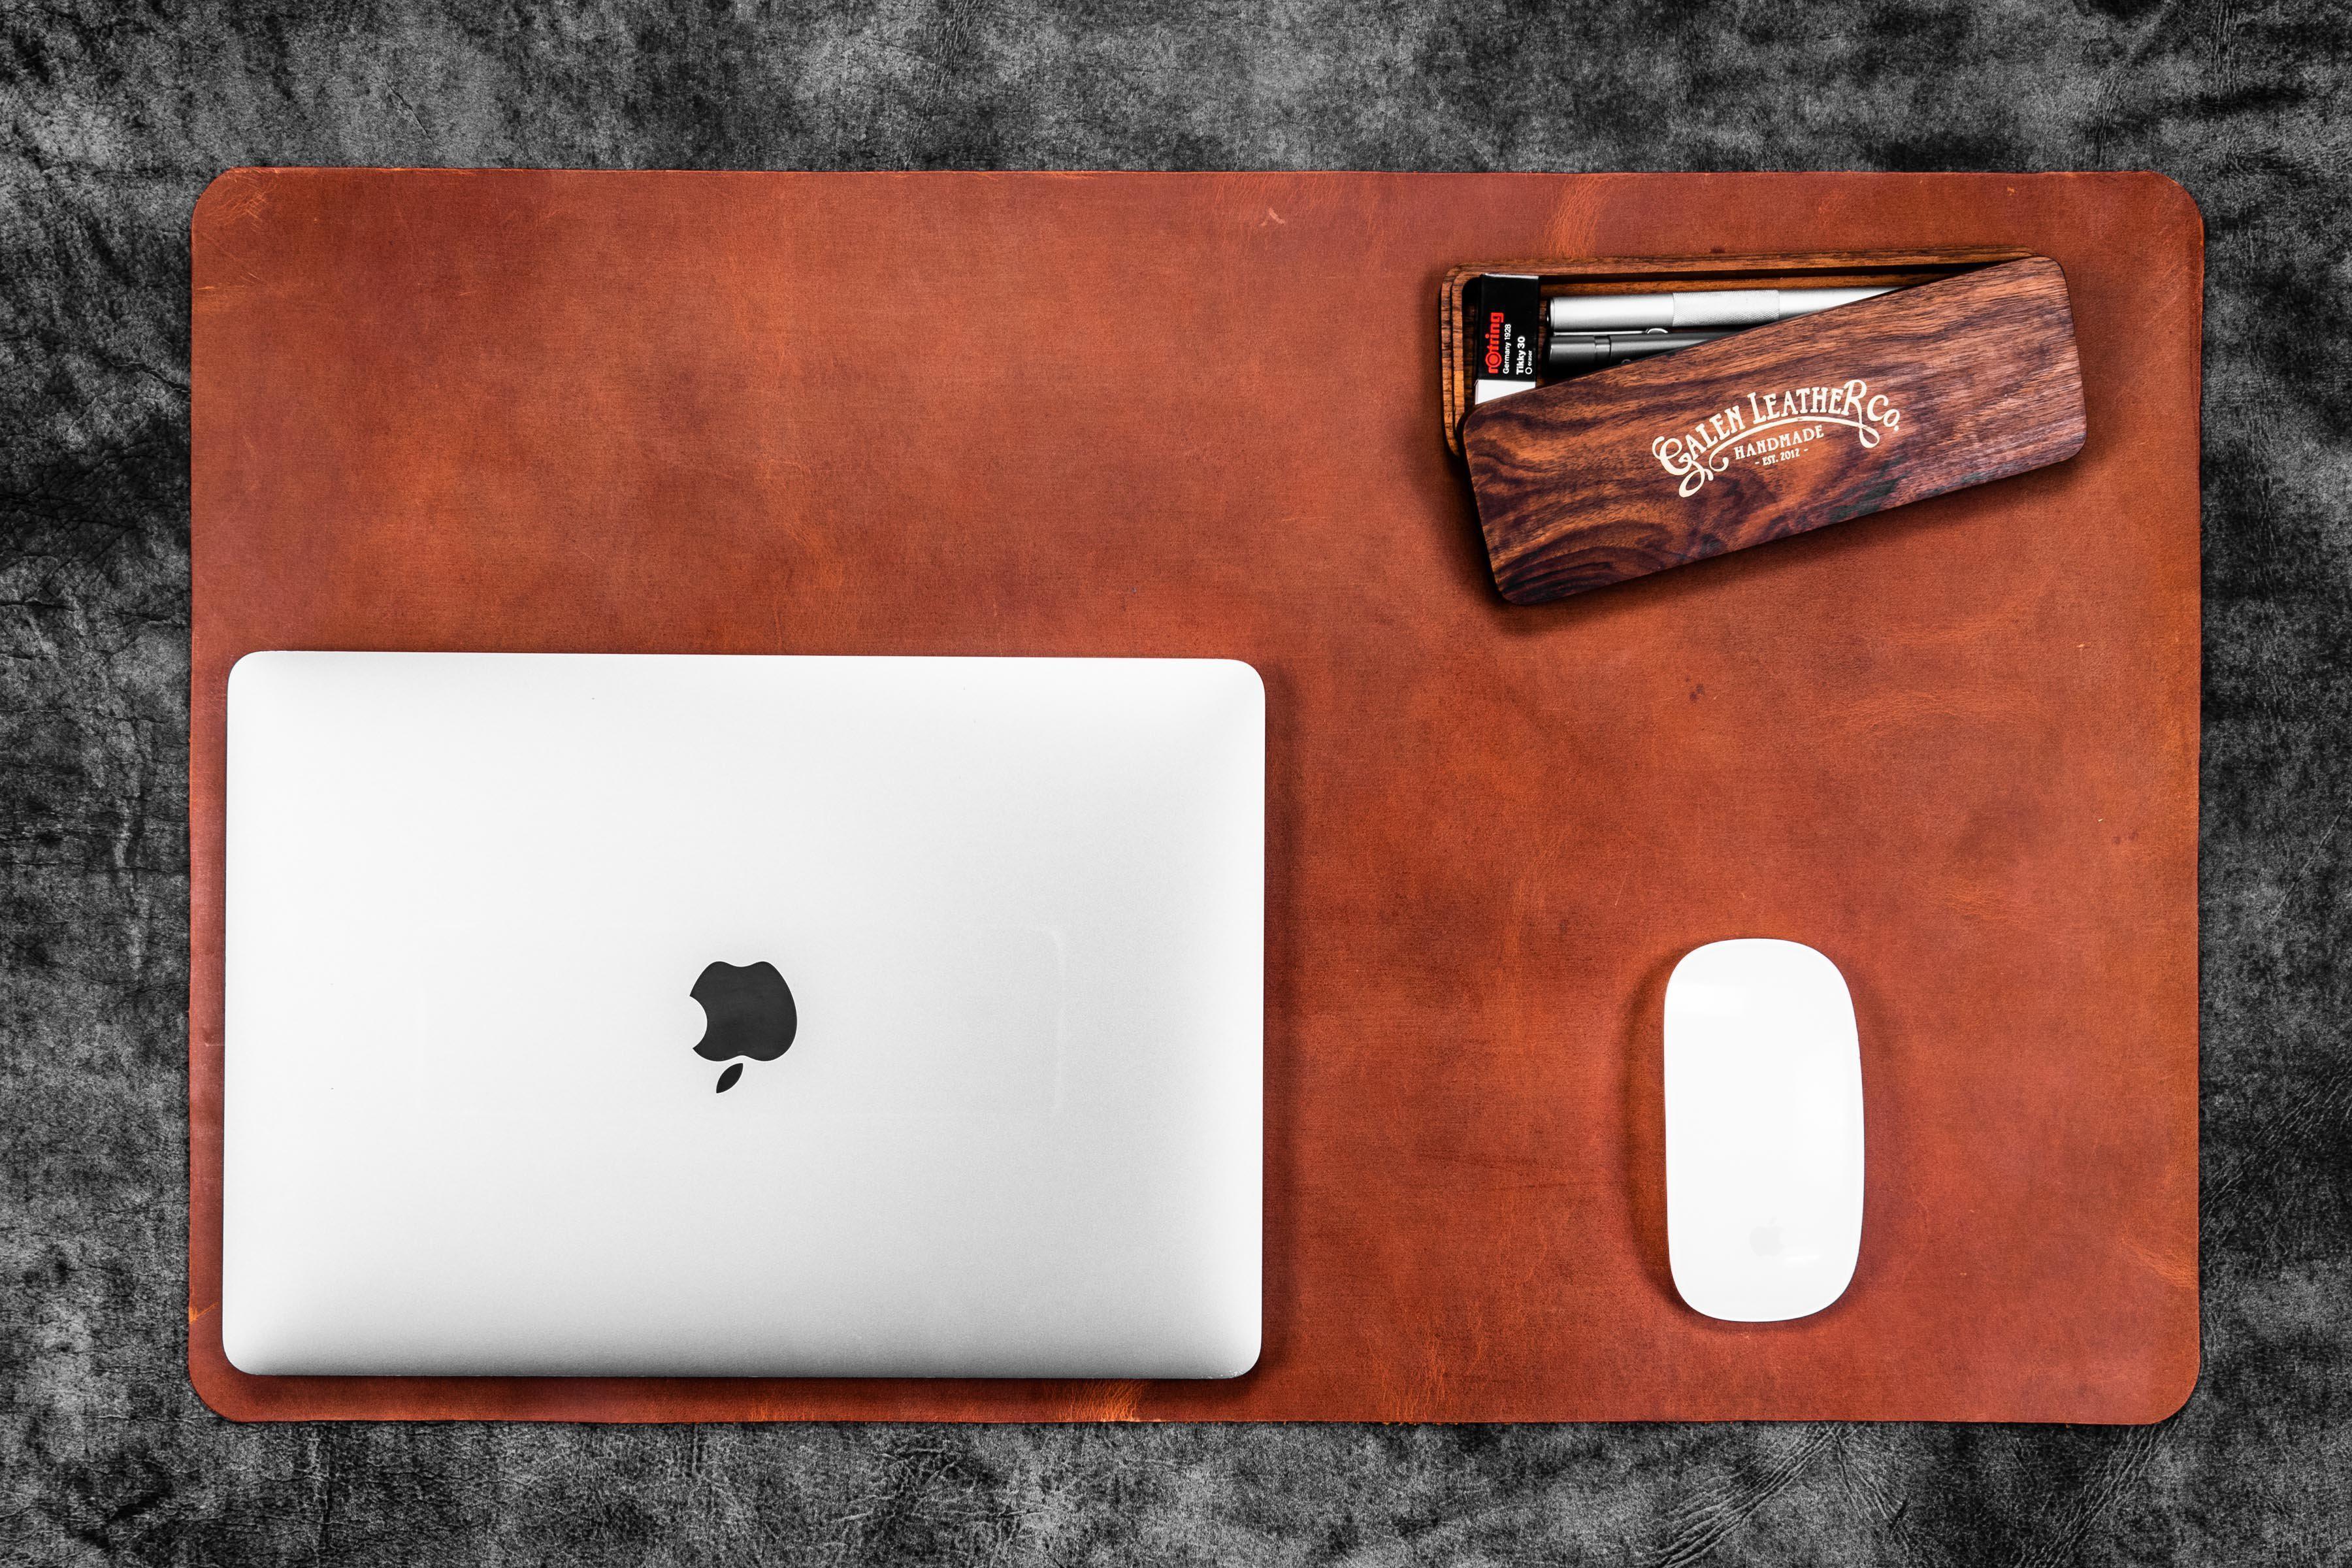 Leather Desk Pad,leather Desk Mat,leather Mouse Pad,personalized